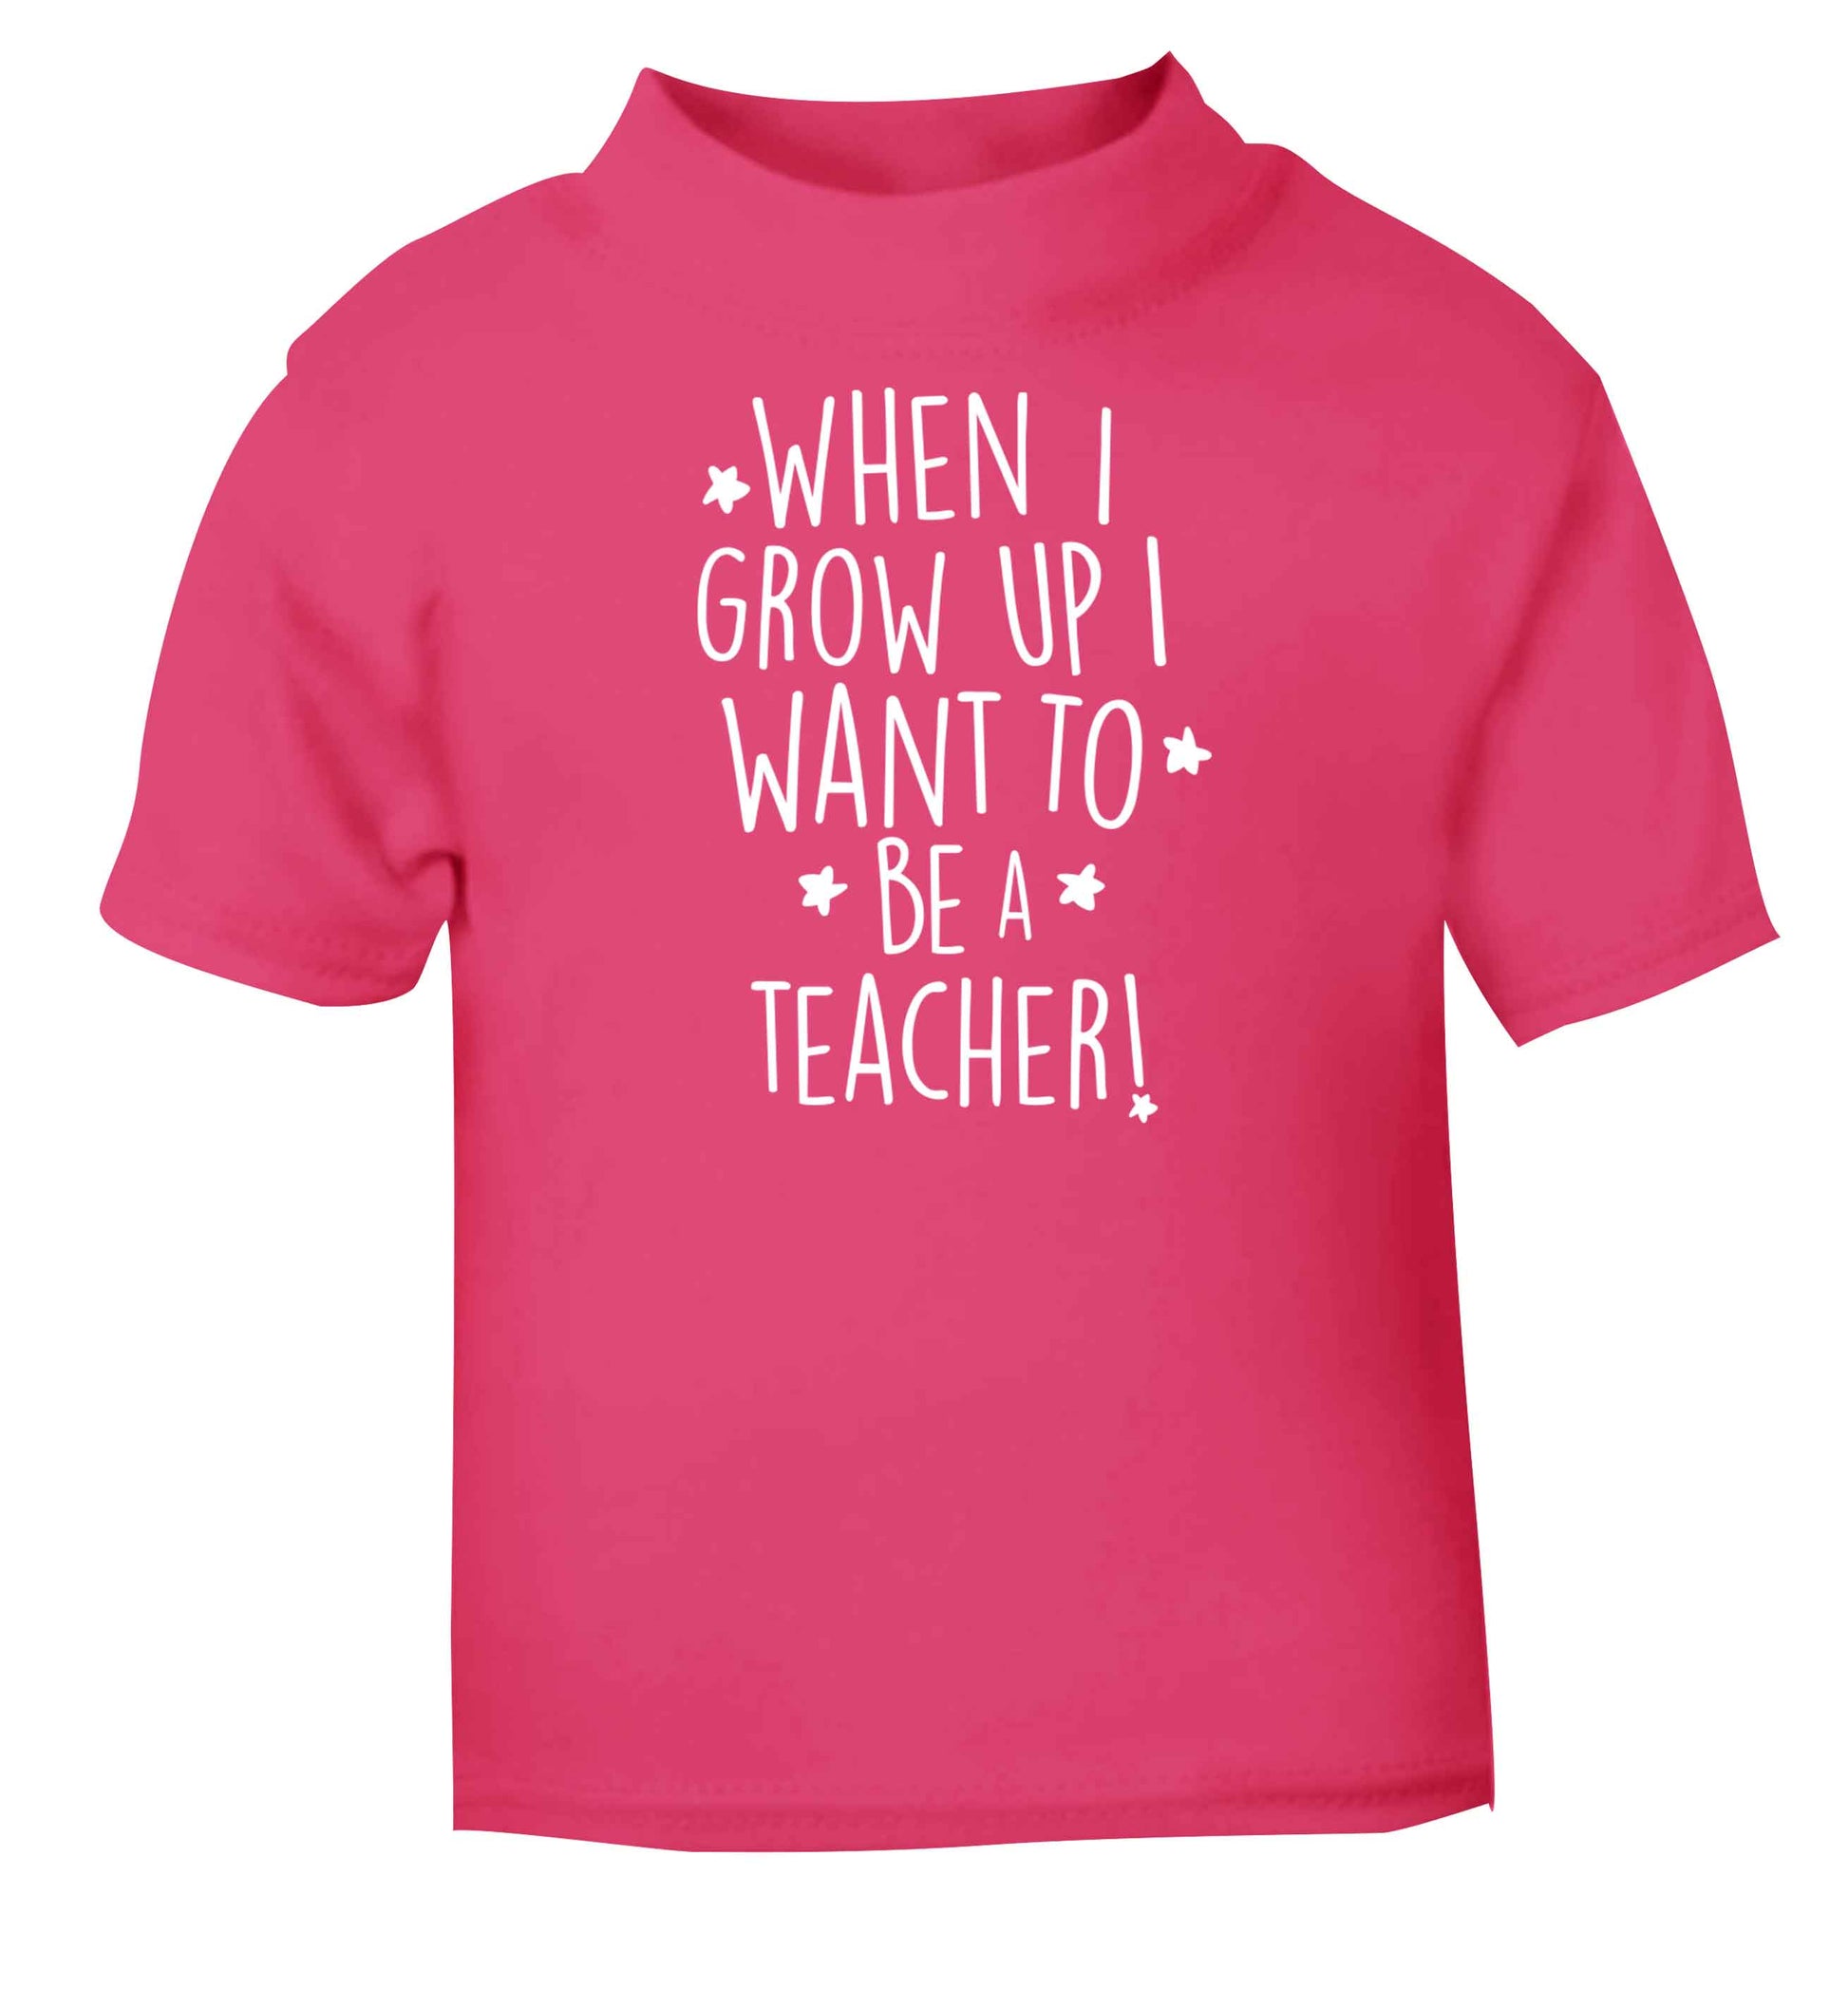 When I grow up I want to be a teacher pink baby toddler Tshirt 2 Years